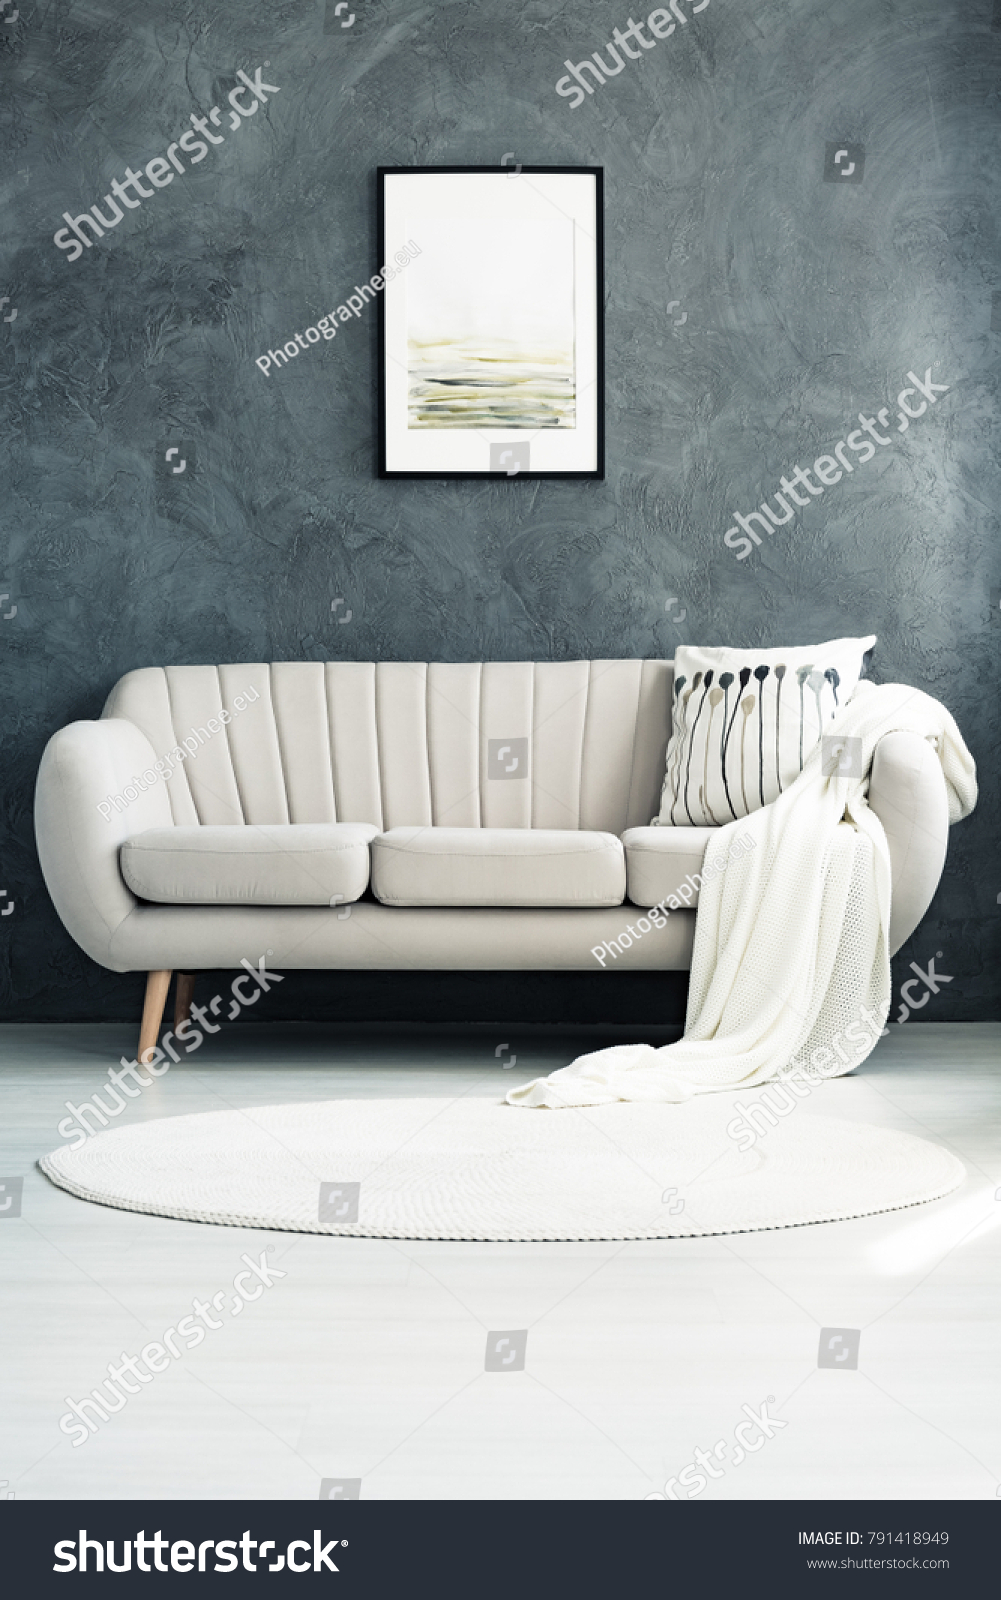 White circular rug lying in front of a comfortable beige sofa with a pillow and a blanket #791418949